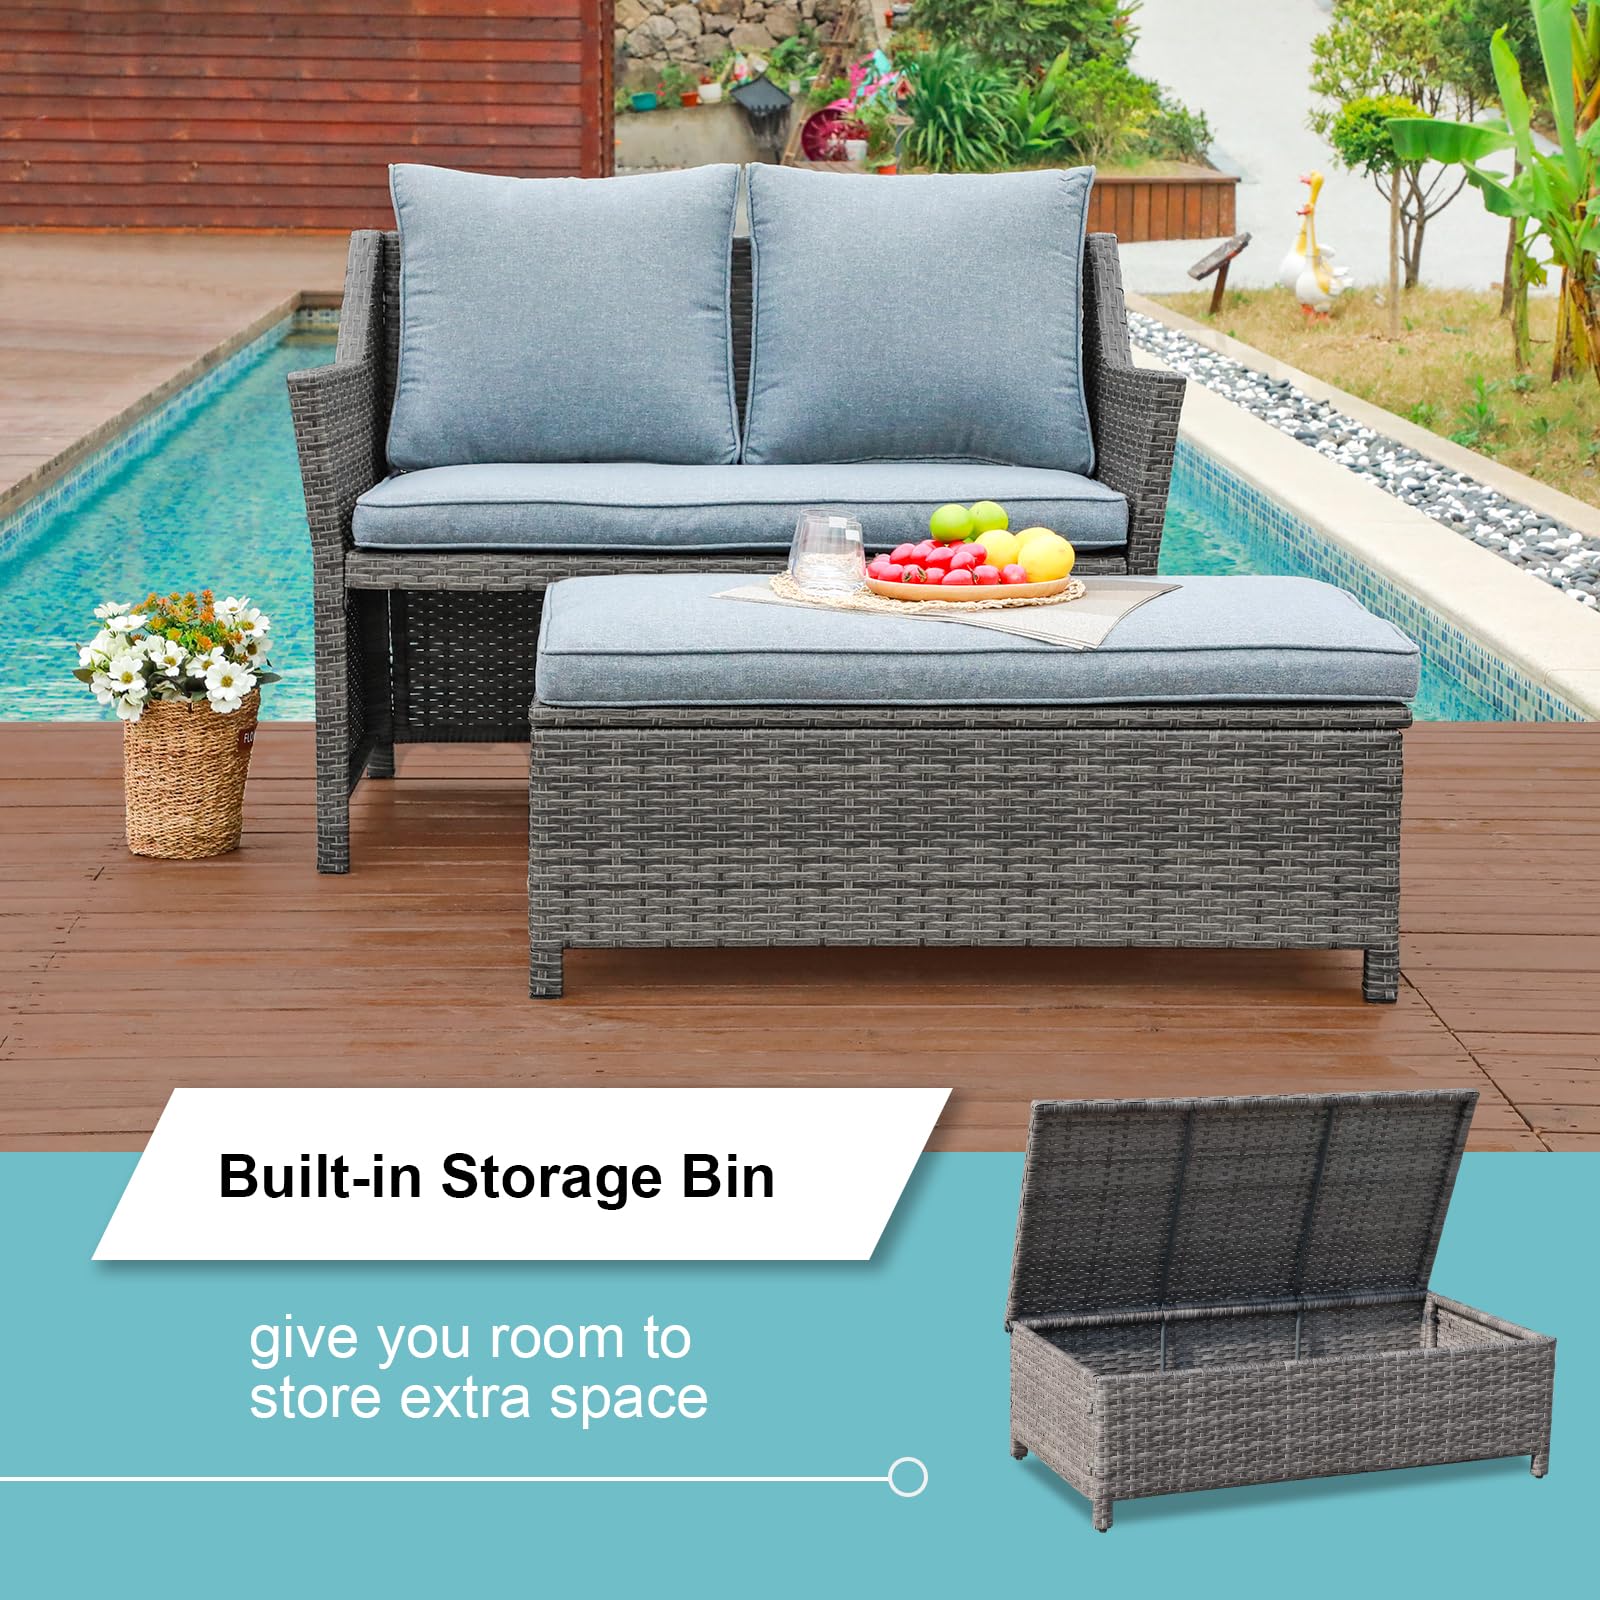 OC Orange-Casual 2-Piece Outdoor Patio Furniture Wicker Love-seat and Coffee Table Set, with Built-in Storage Bin, Grey Rattan, Grey Cushions